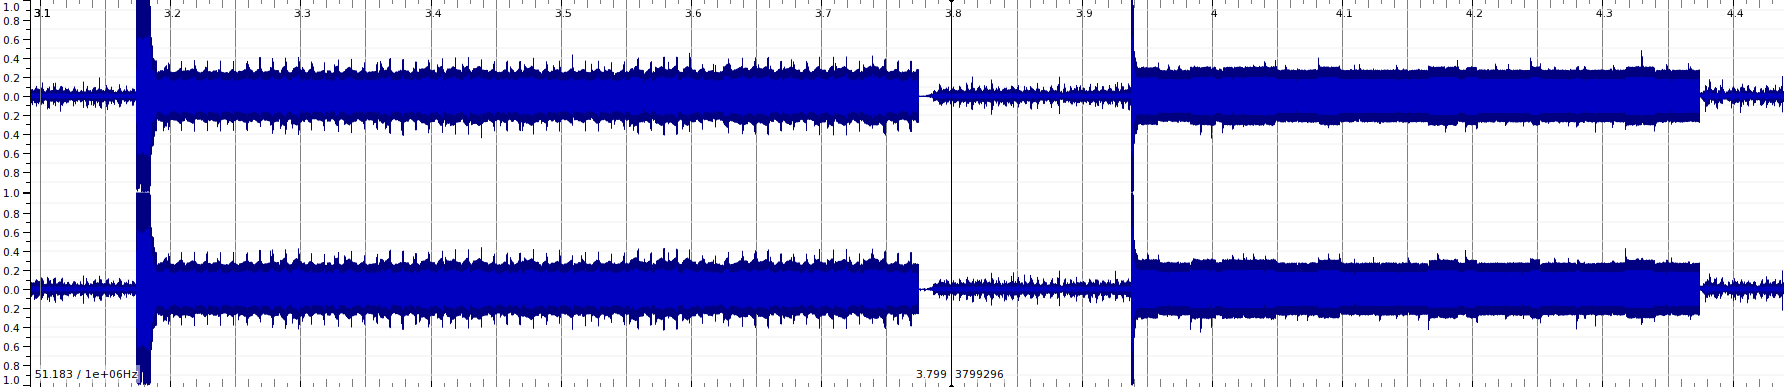 Waveform showing two channels of silence followed by a short loud burst and a longer textured section, repeated twice